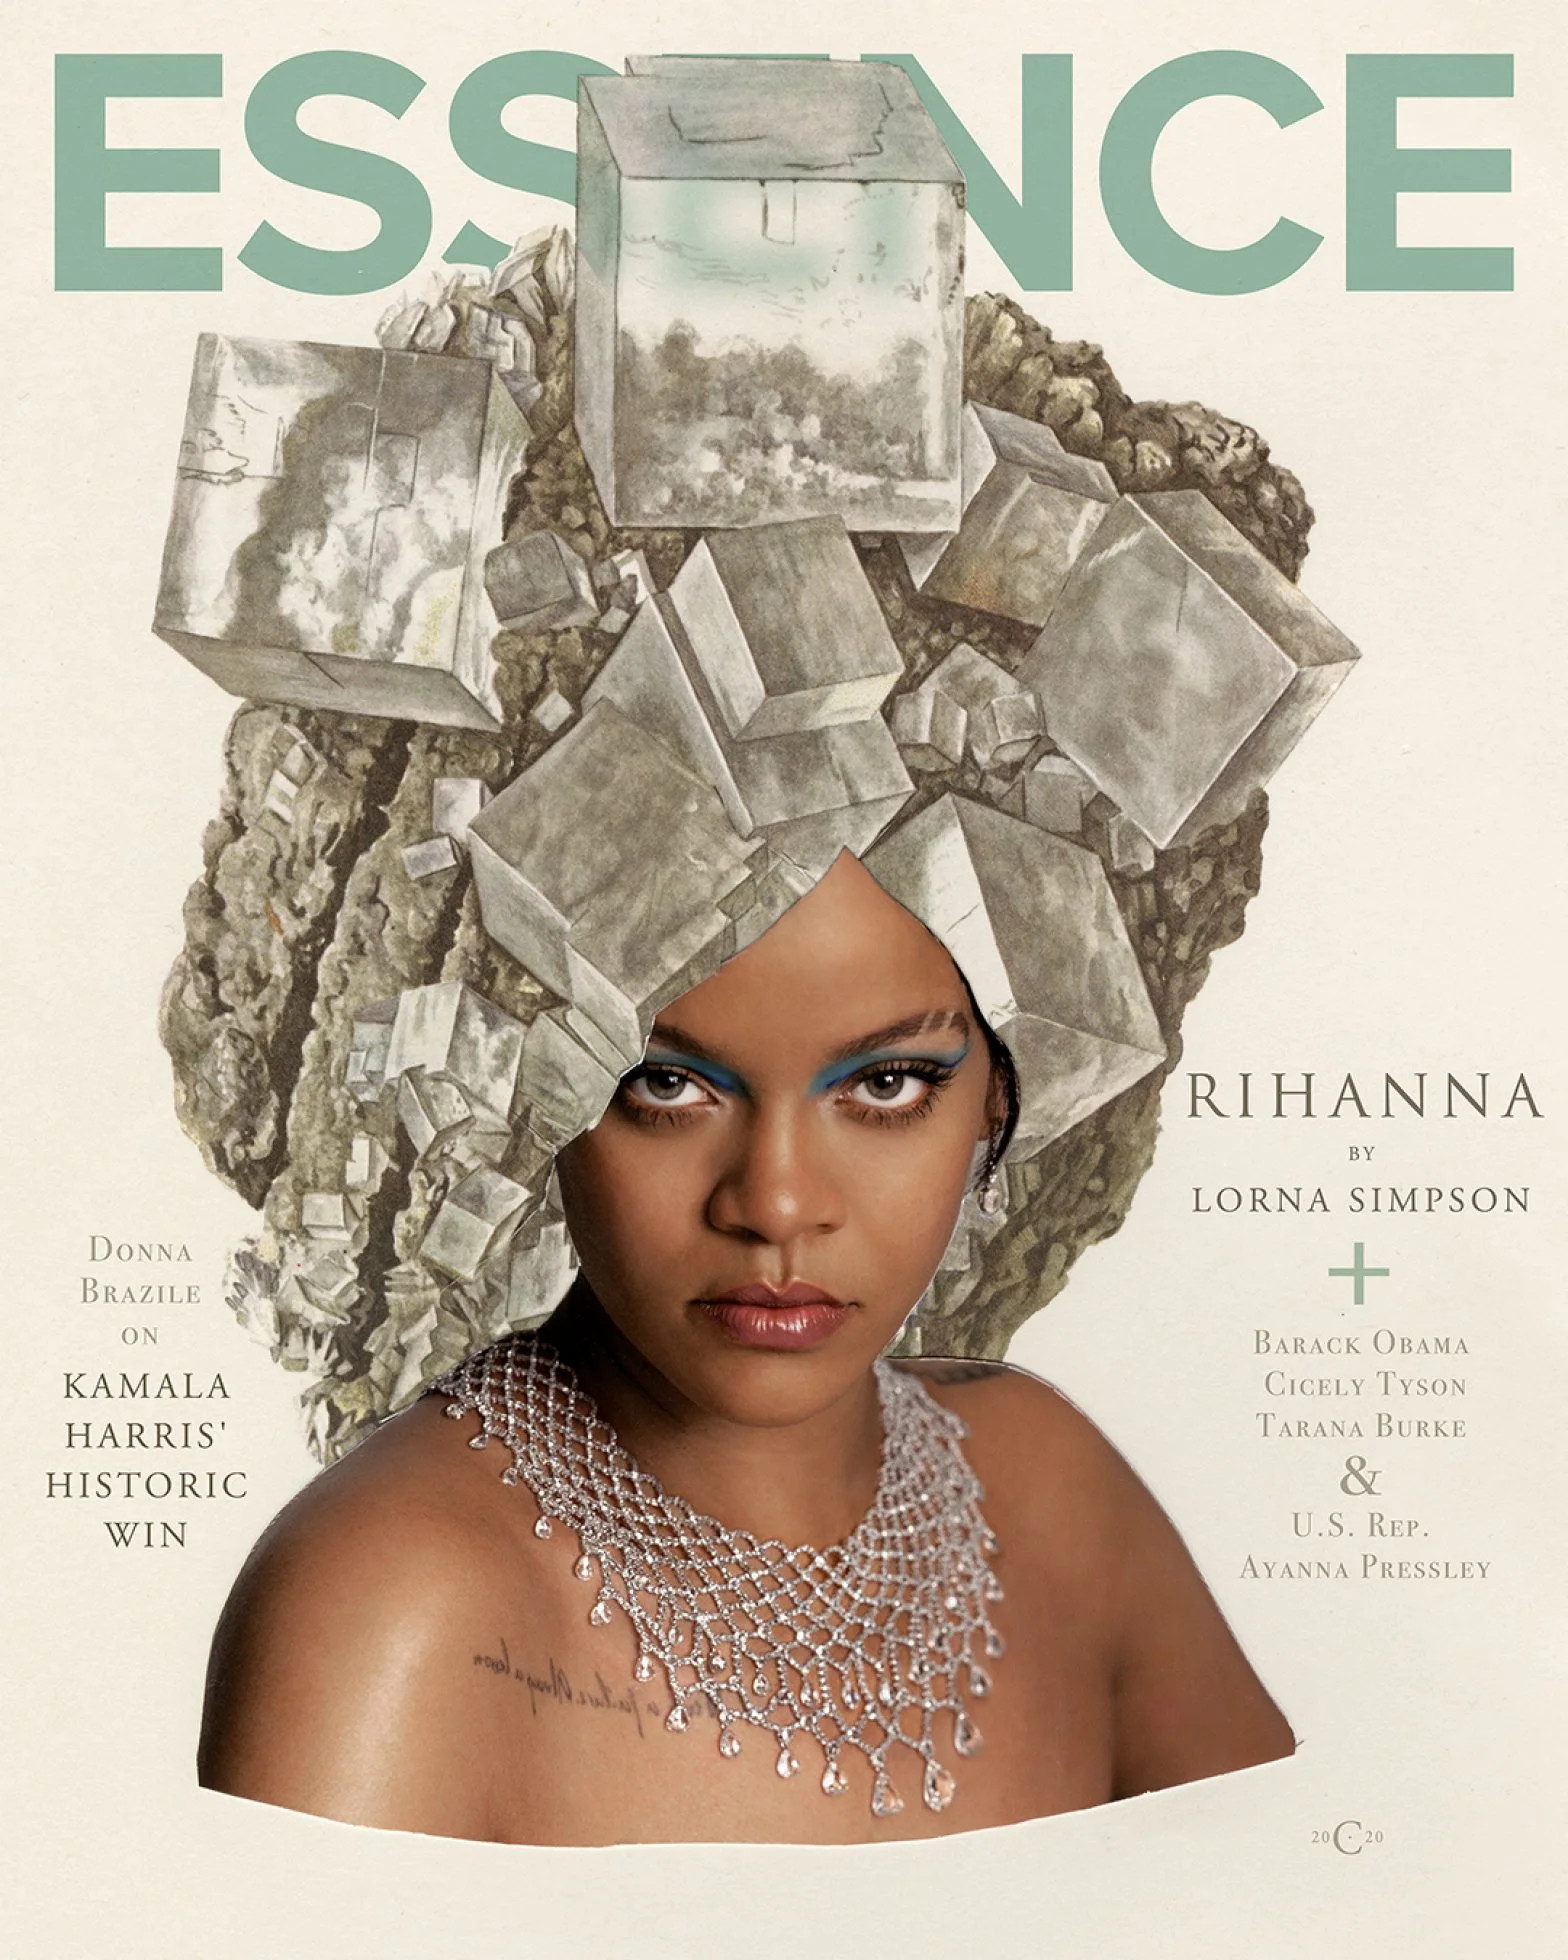 Rihanna and Lorna Simpson collaborate for the new Essence cover